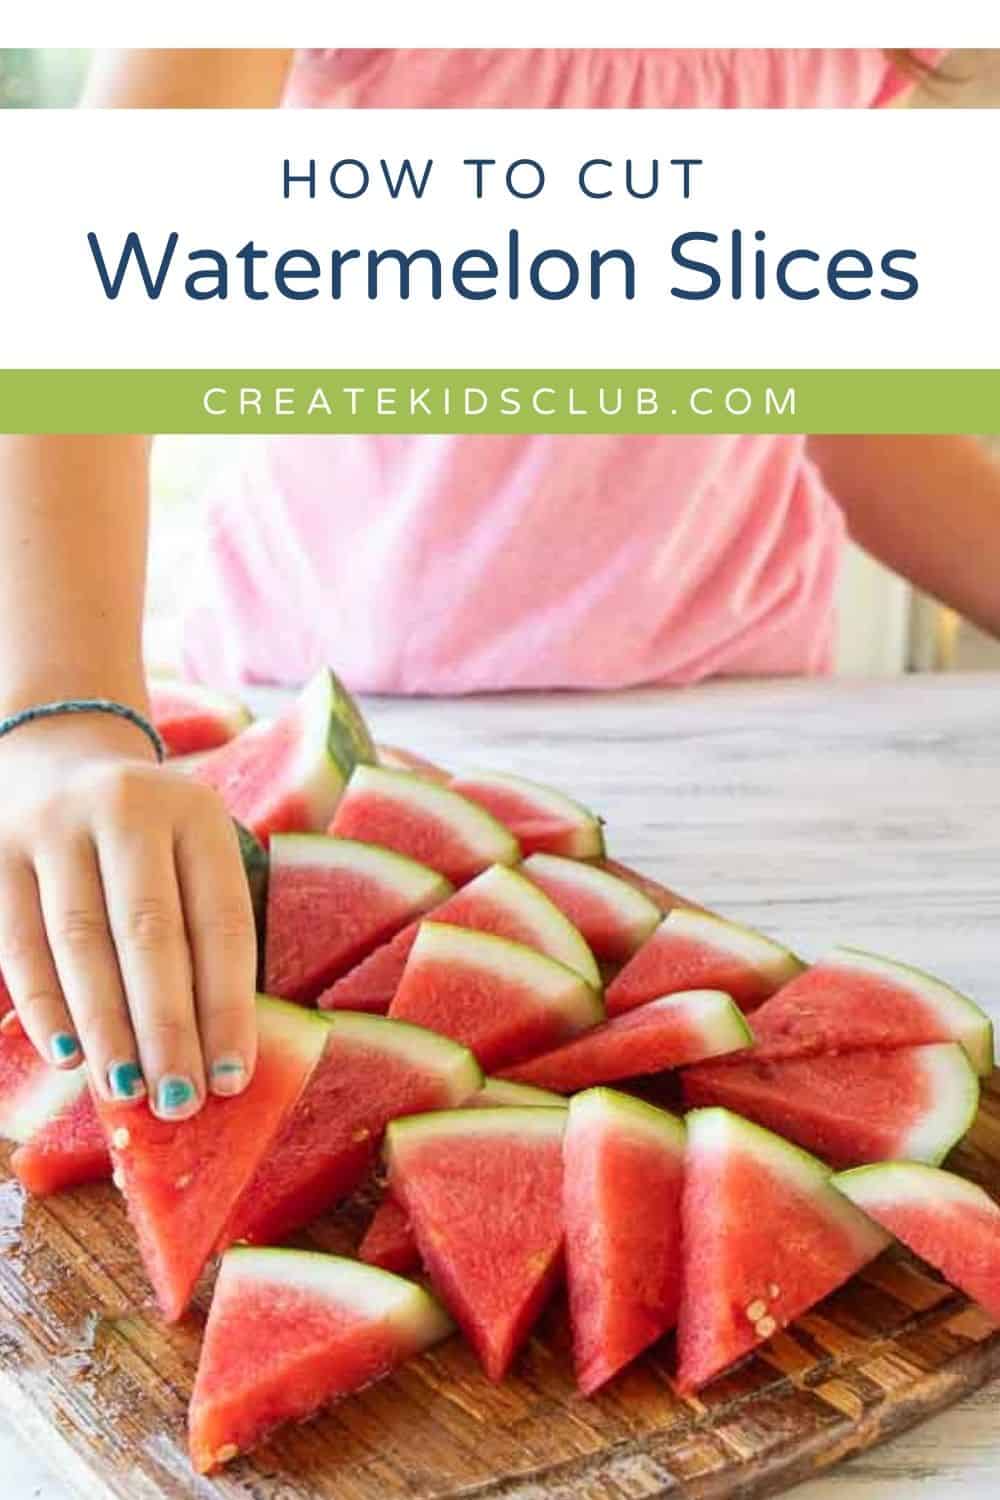 Pin showing watermelon slices.